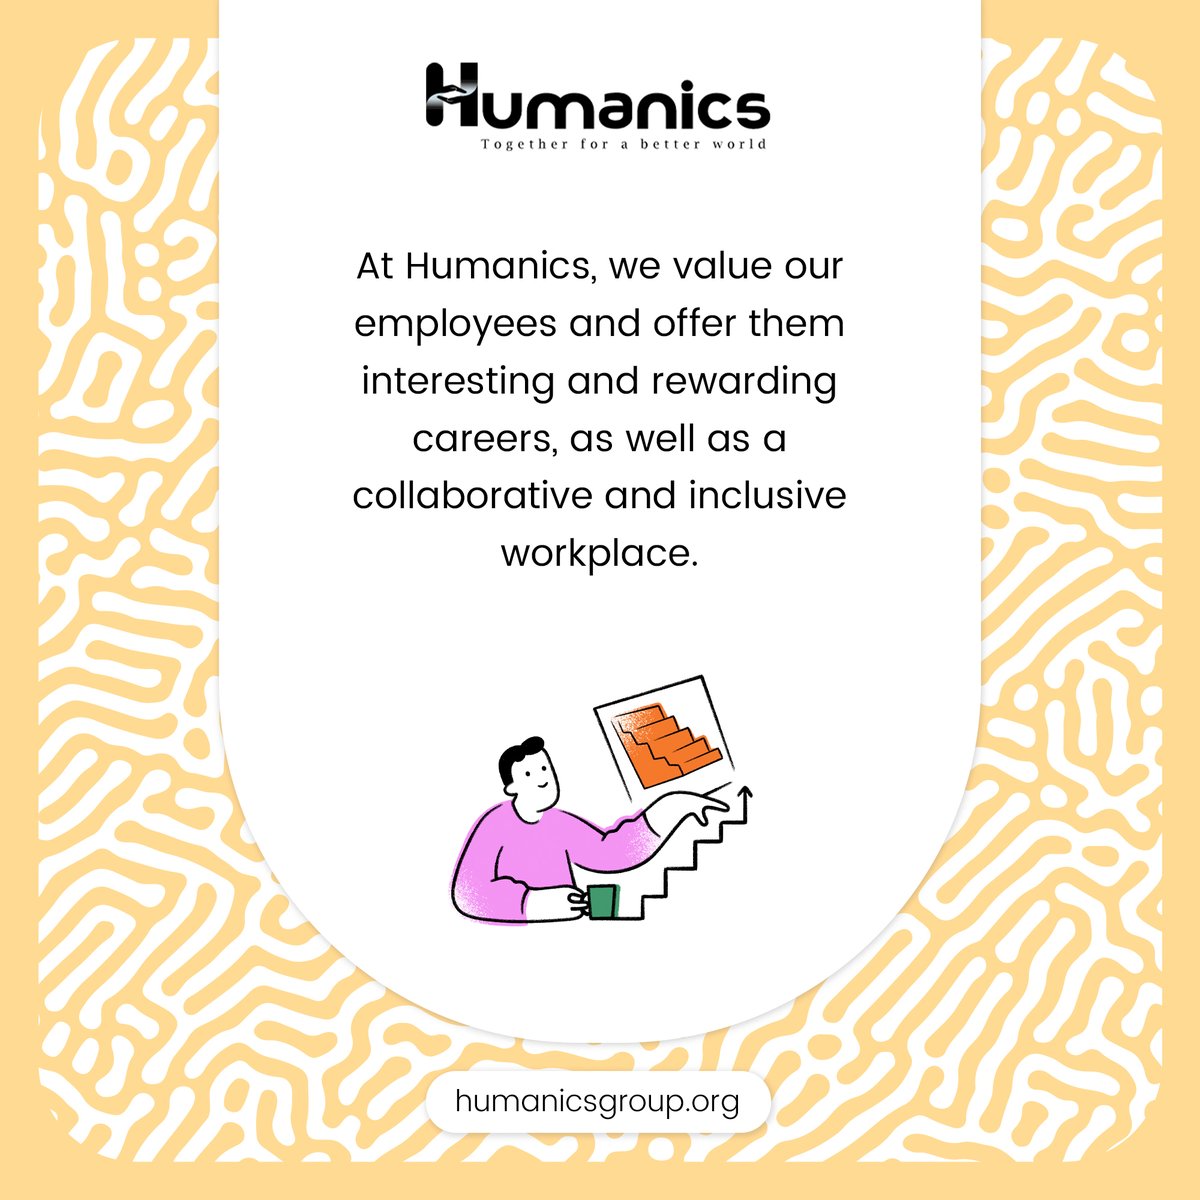 At @Humanicsgroup, we value our employees and offer them interesting and rewarding careers, as well as a collaborative and inclusive workplace. That's the essence of our approach! 🎯 #humanics #TogetherForABetterWorld